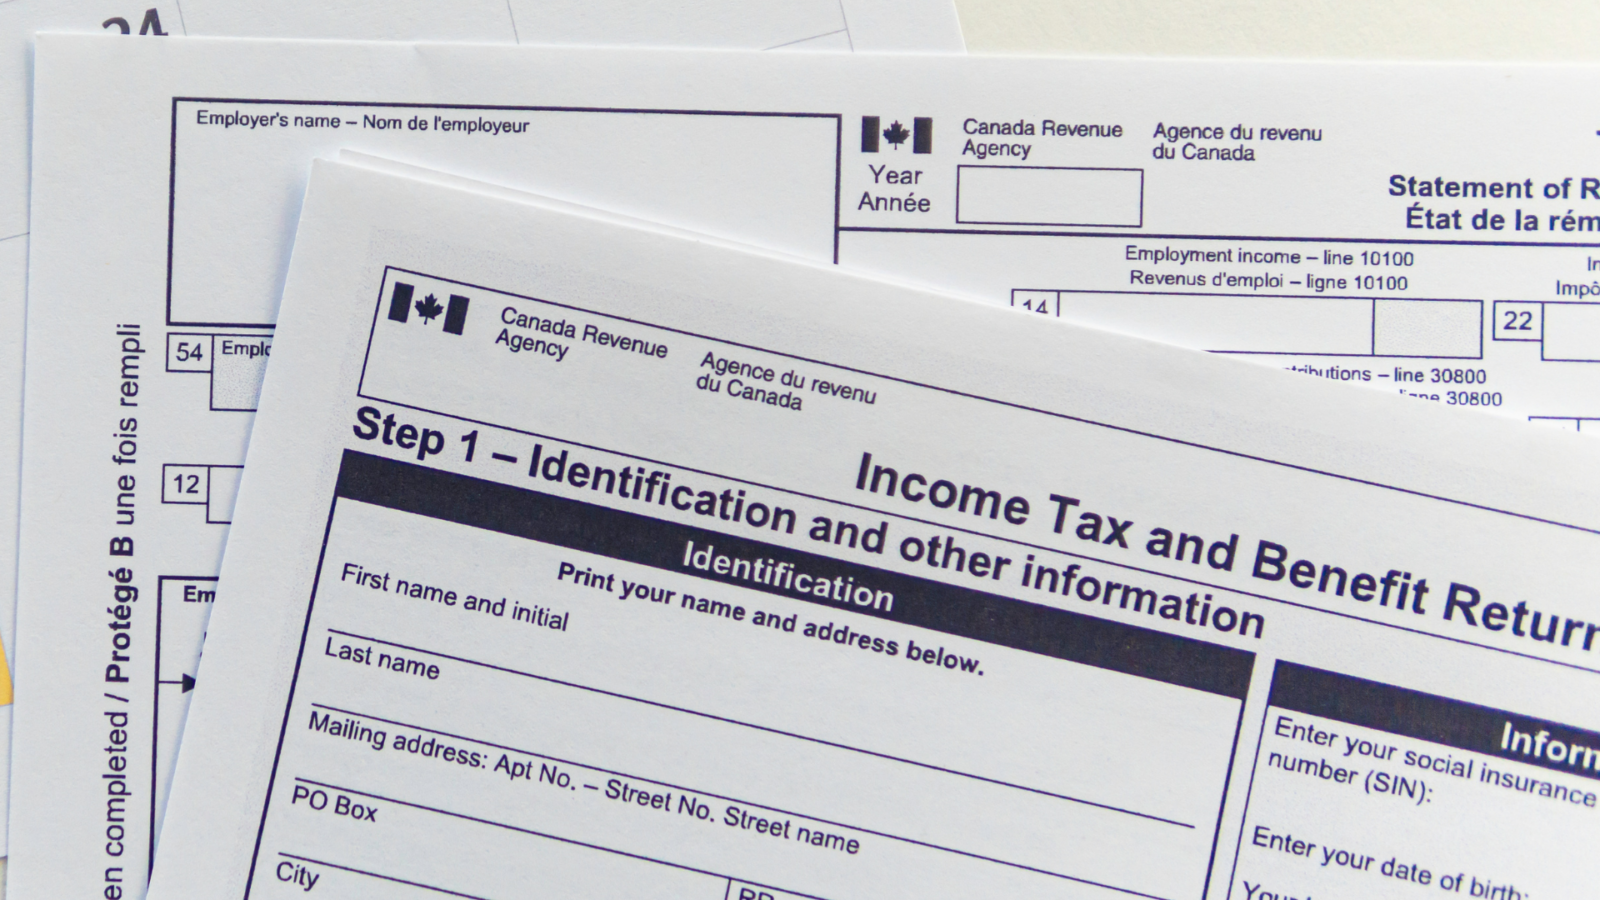 An image of some forms that are used for tax filing in Canada